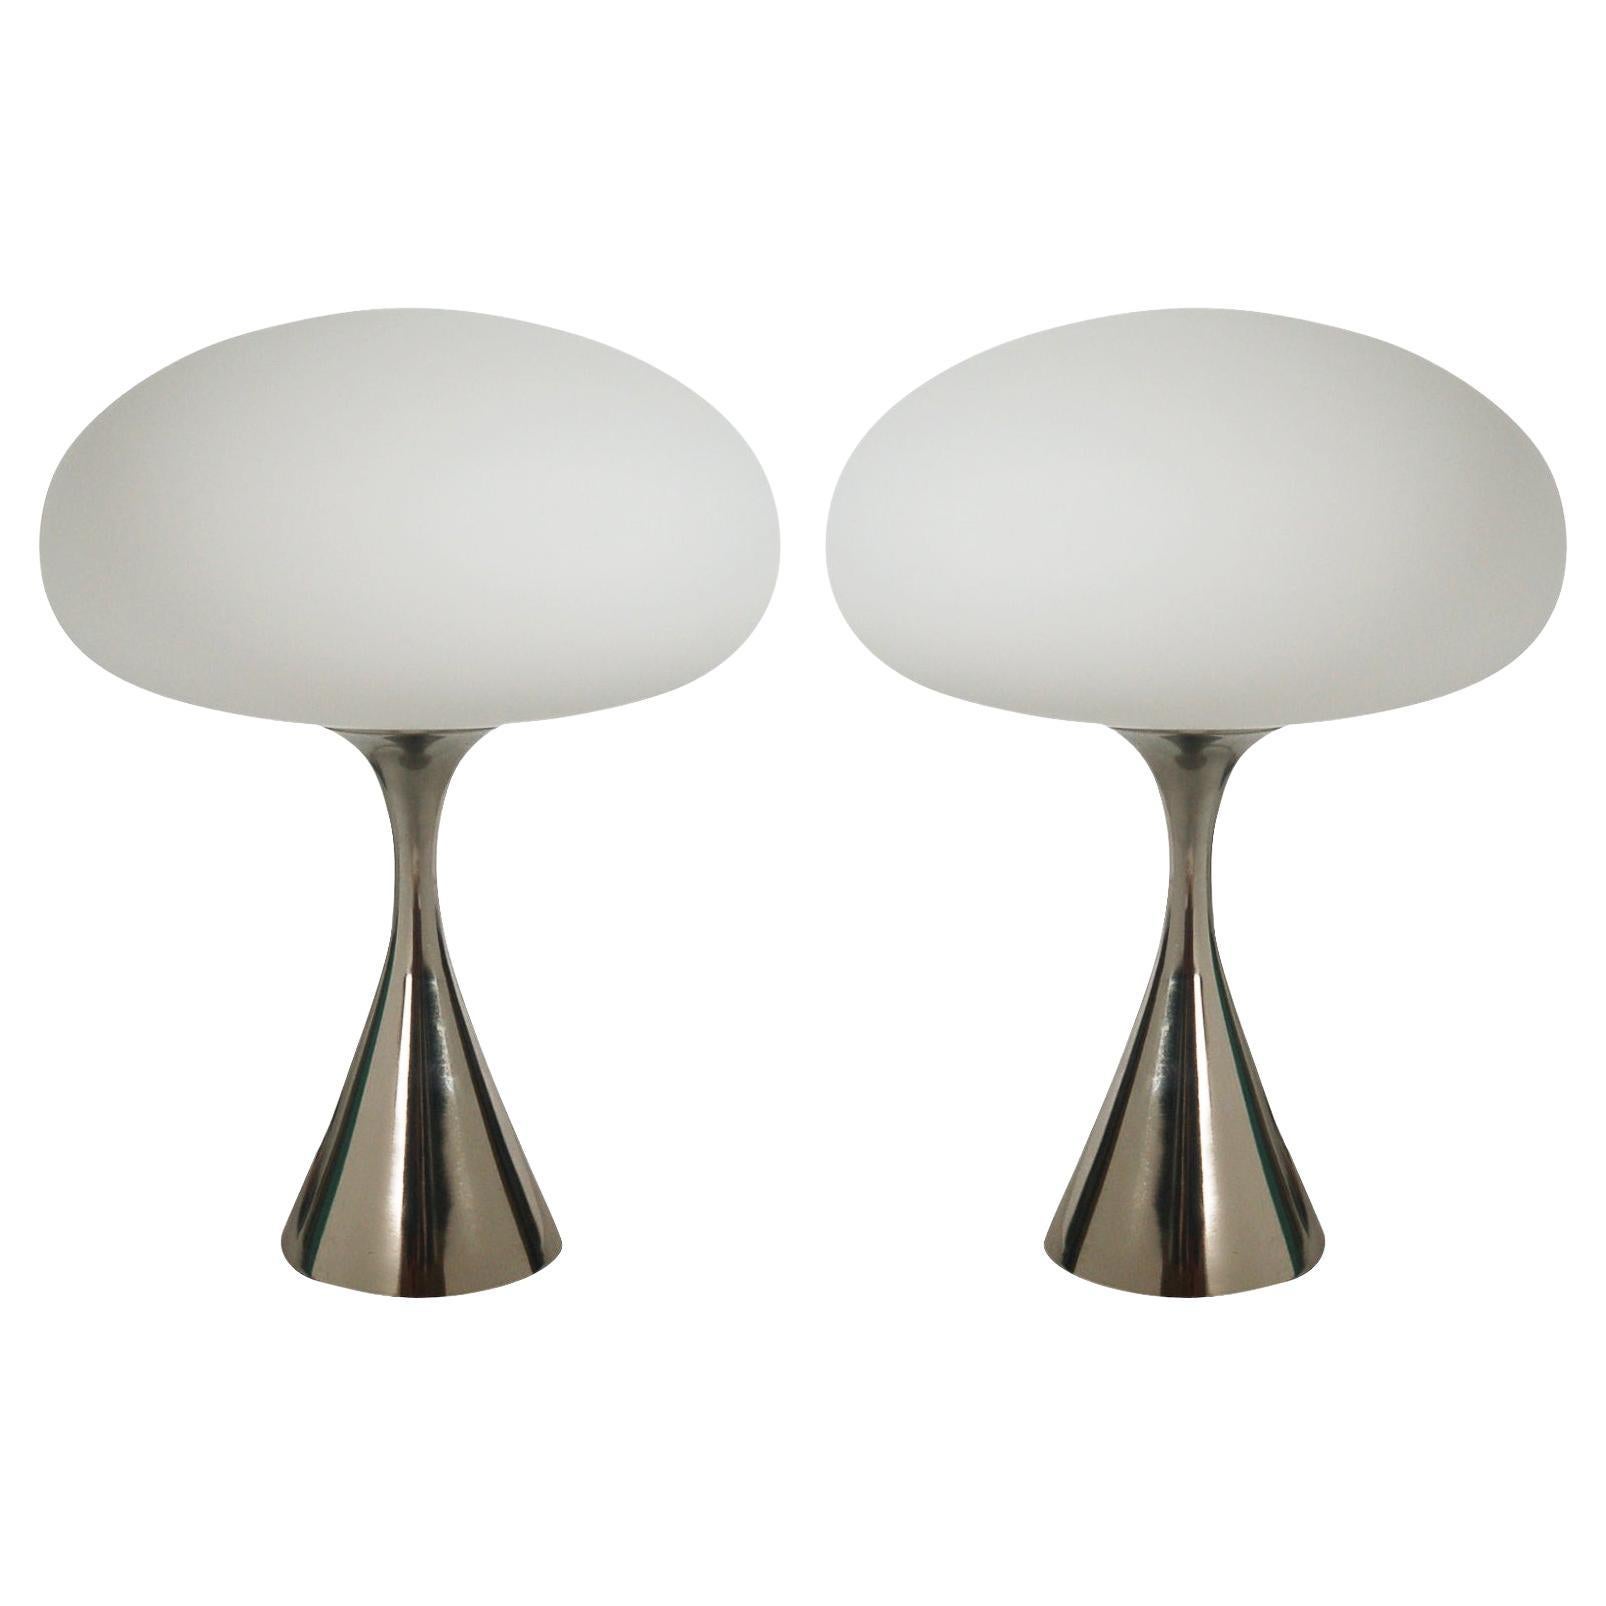 Pair of Mid-Century Modern Table Lamps by Designline in Chrome & White Glass